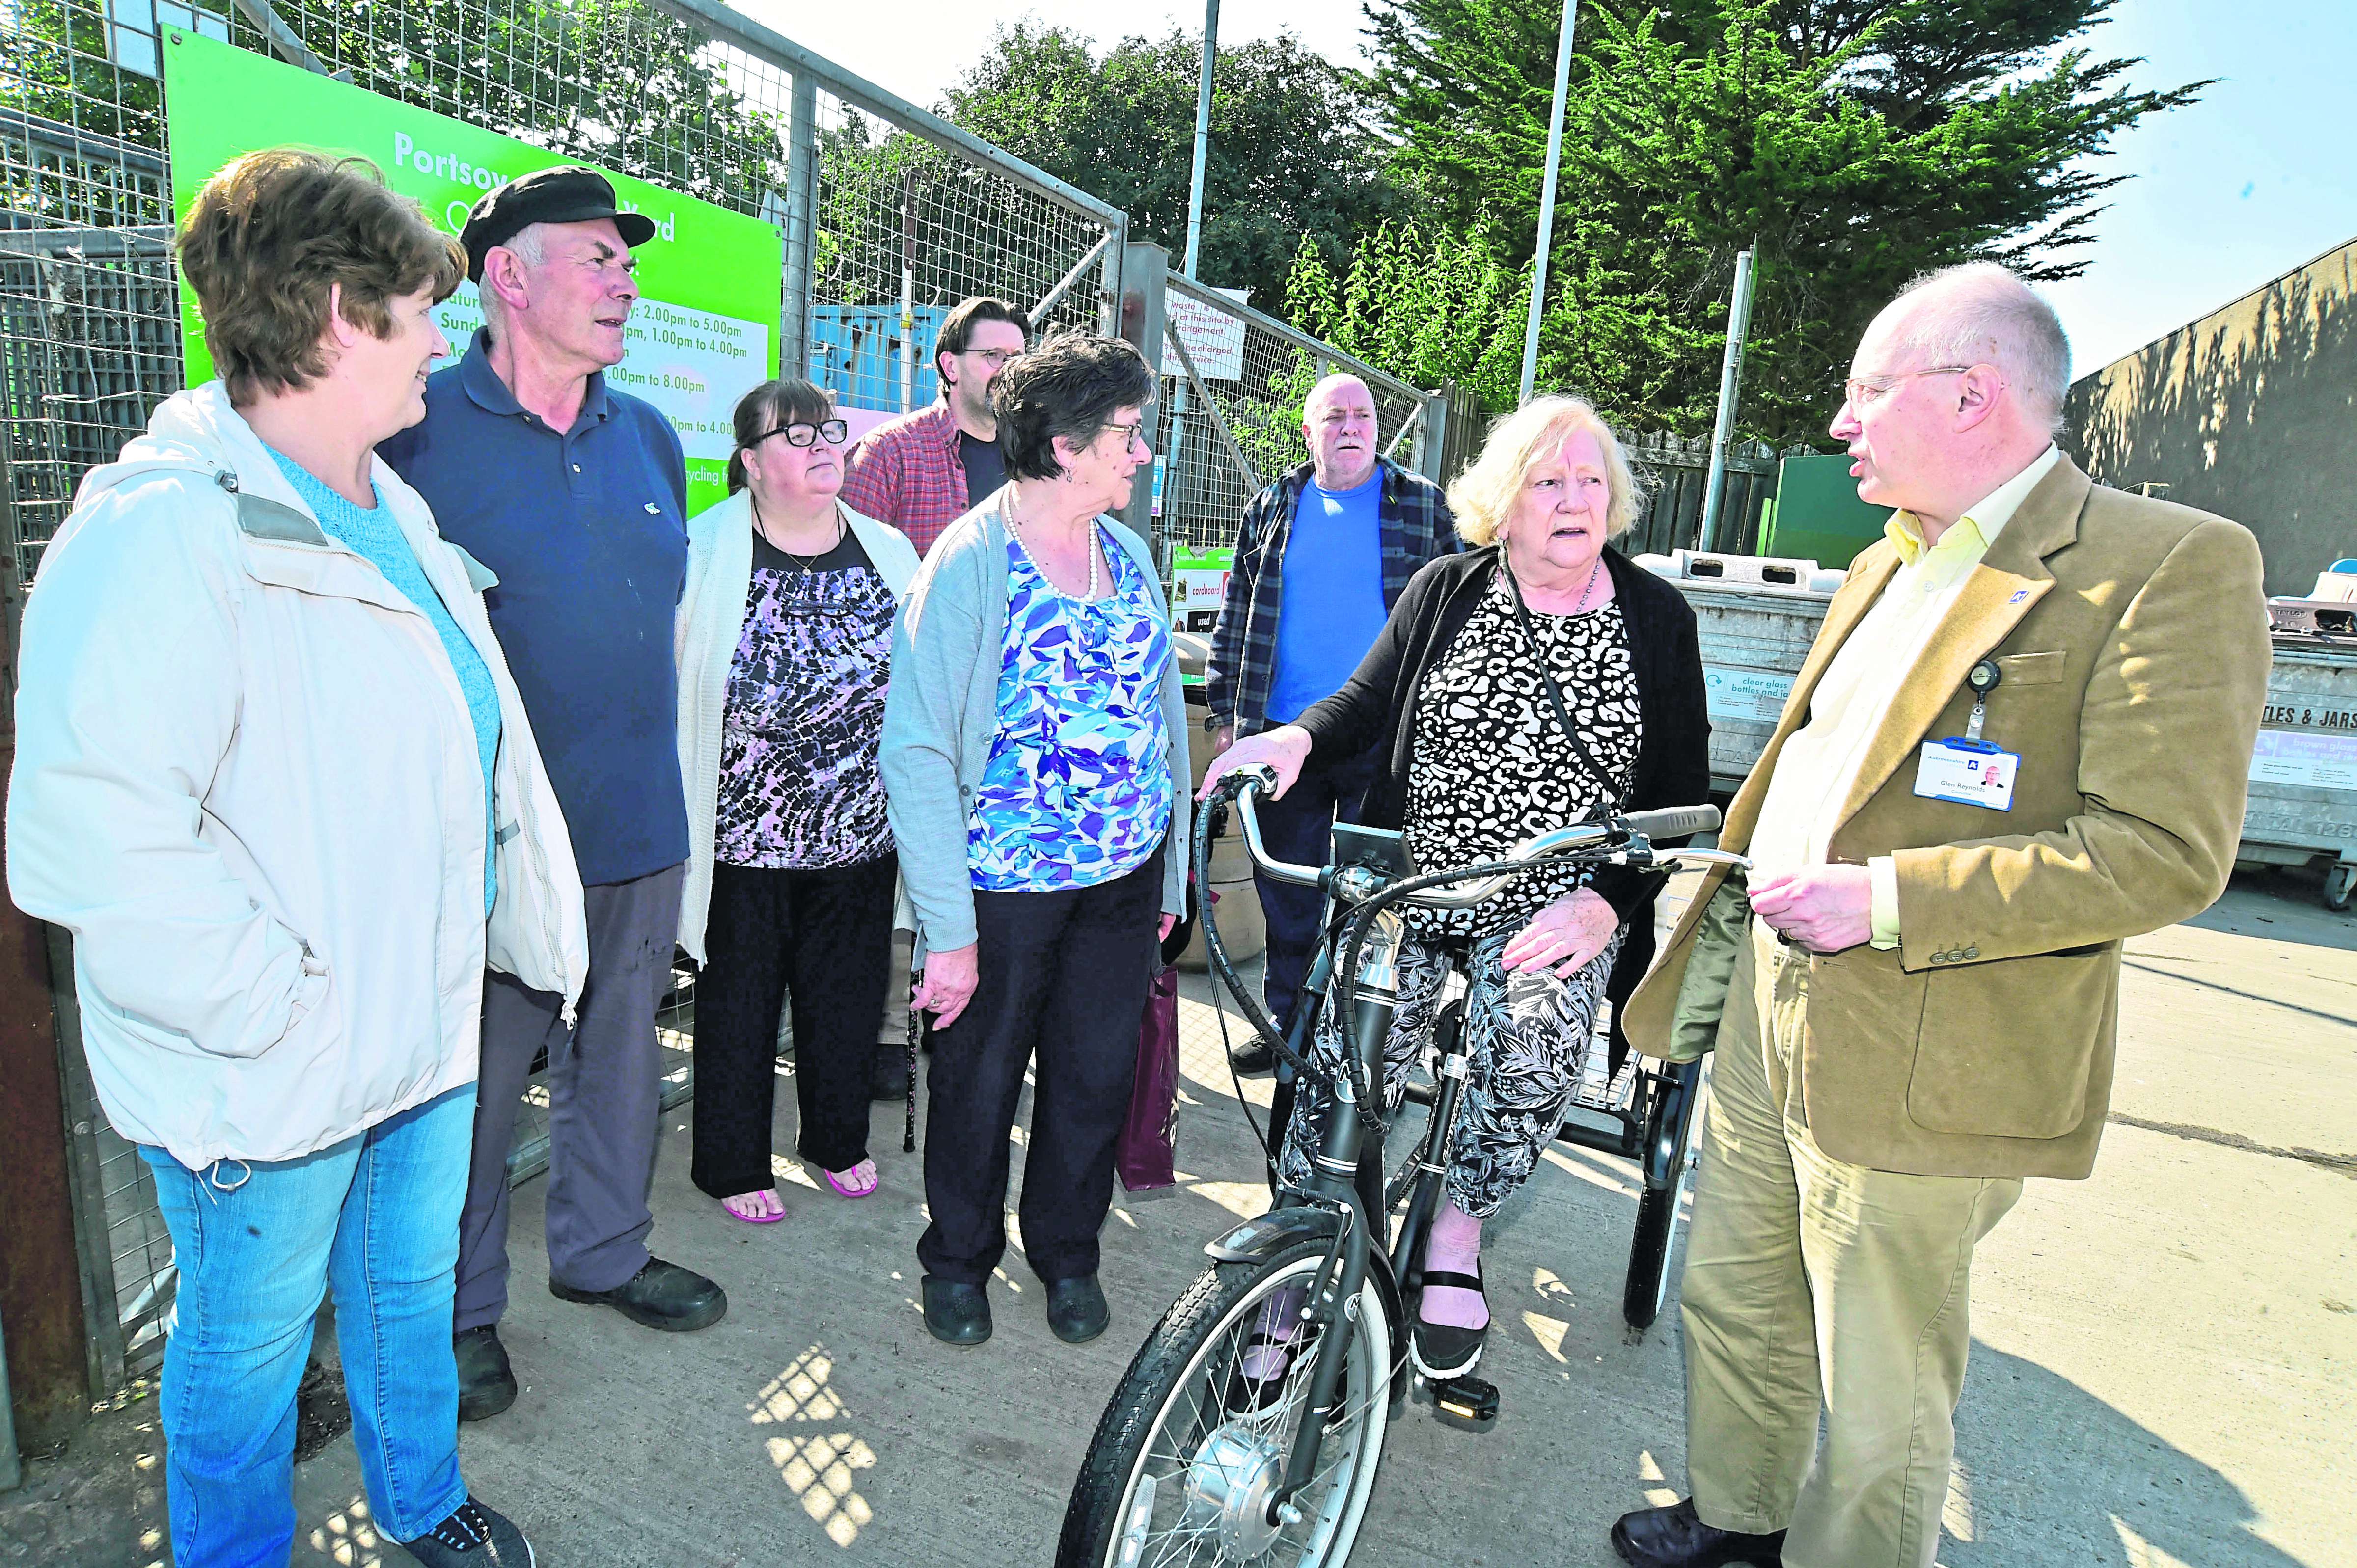 Councillor Glen Reynolds talks to local residents affected by the proposed closure at the Portsoy waste site.